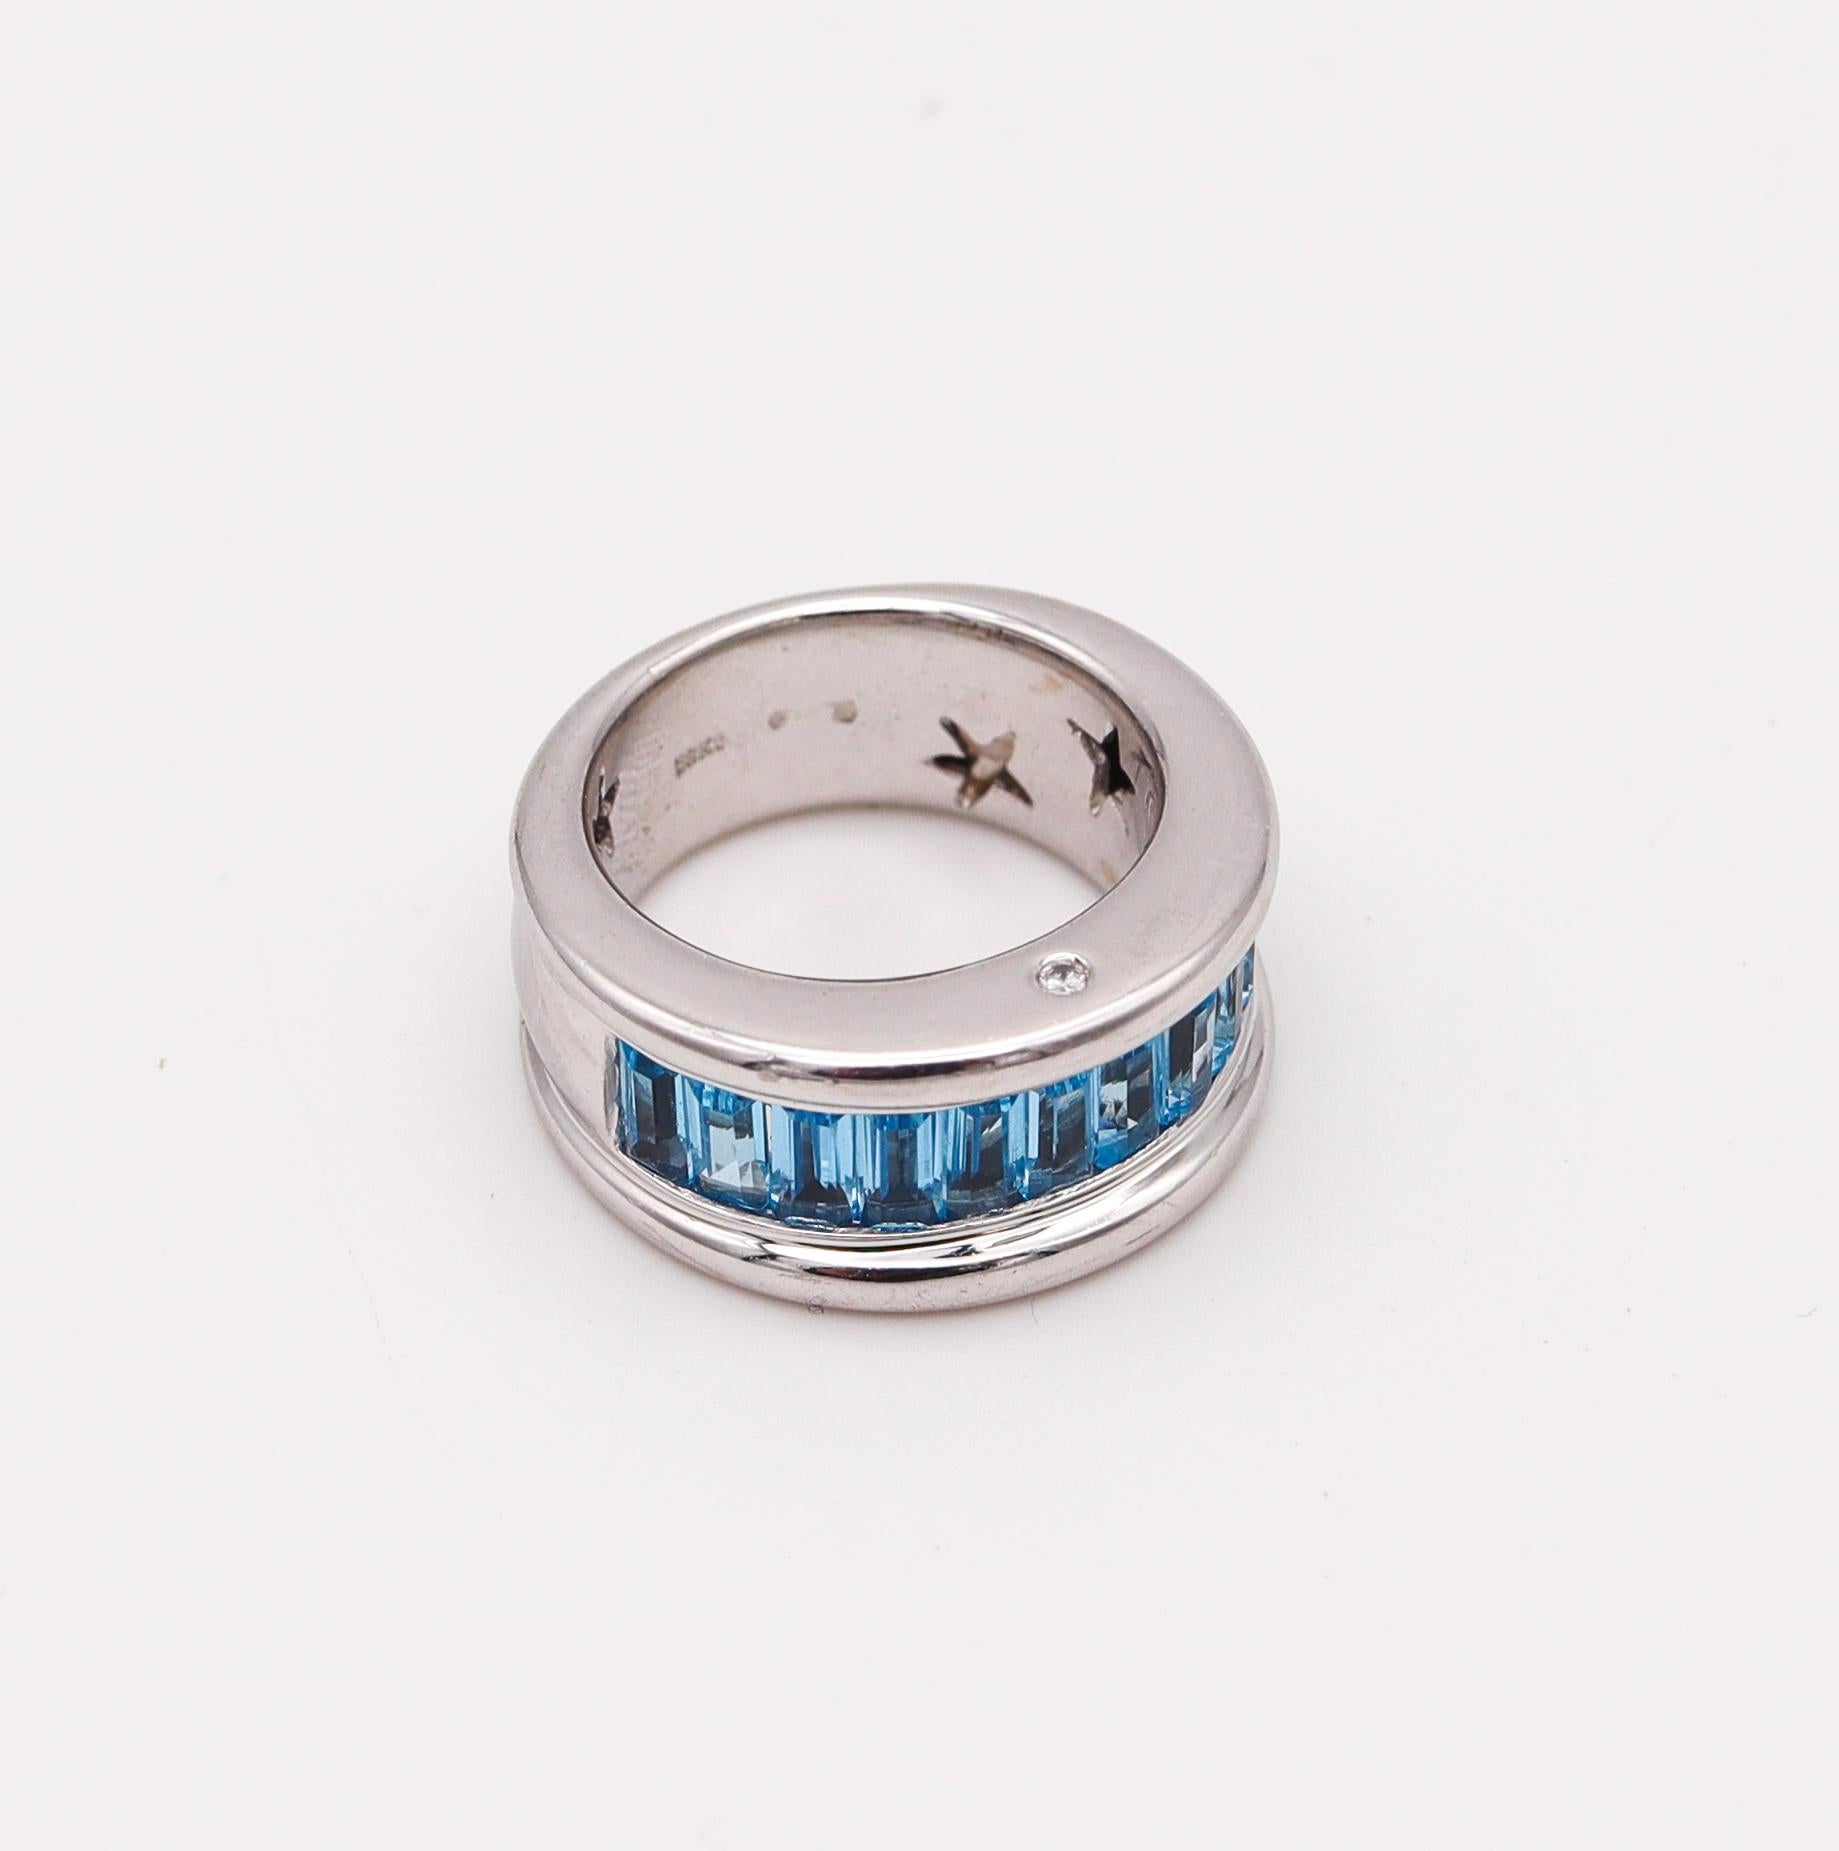 Modernist H. Stern Band Ring in 18Kt White Gold with 3.91 Ctw in Blue Topaz and Diamonds